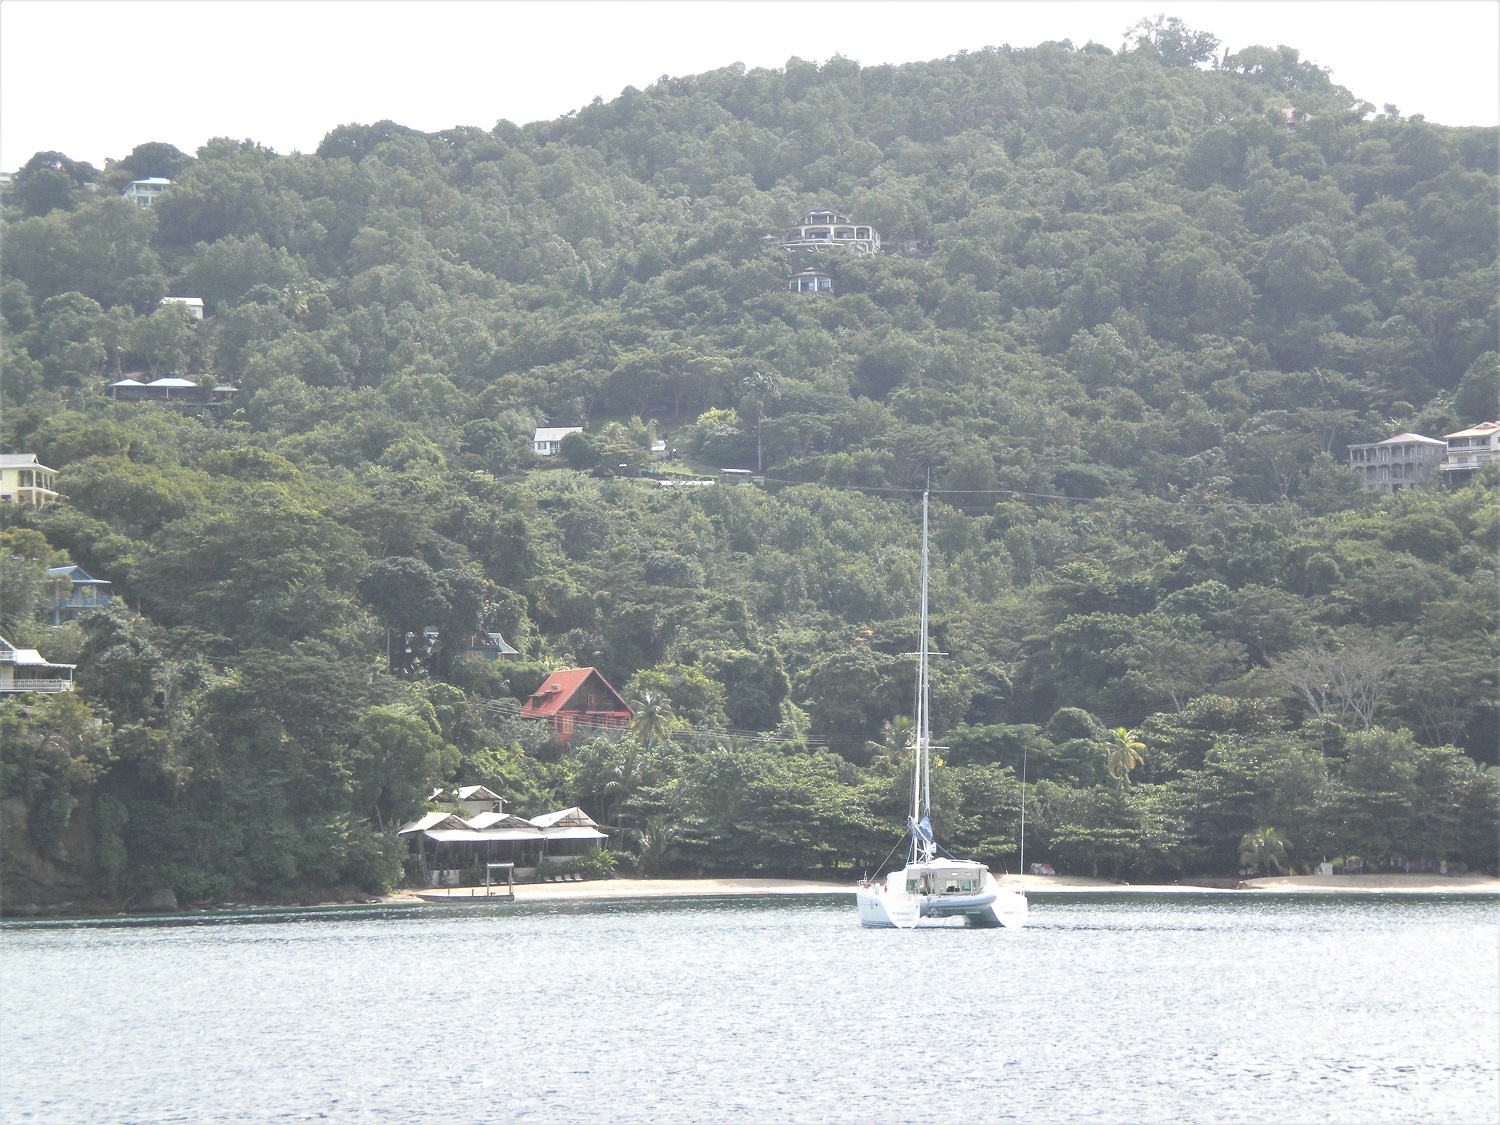 Anchorage of Bequia